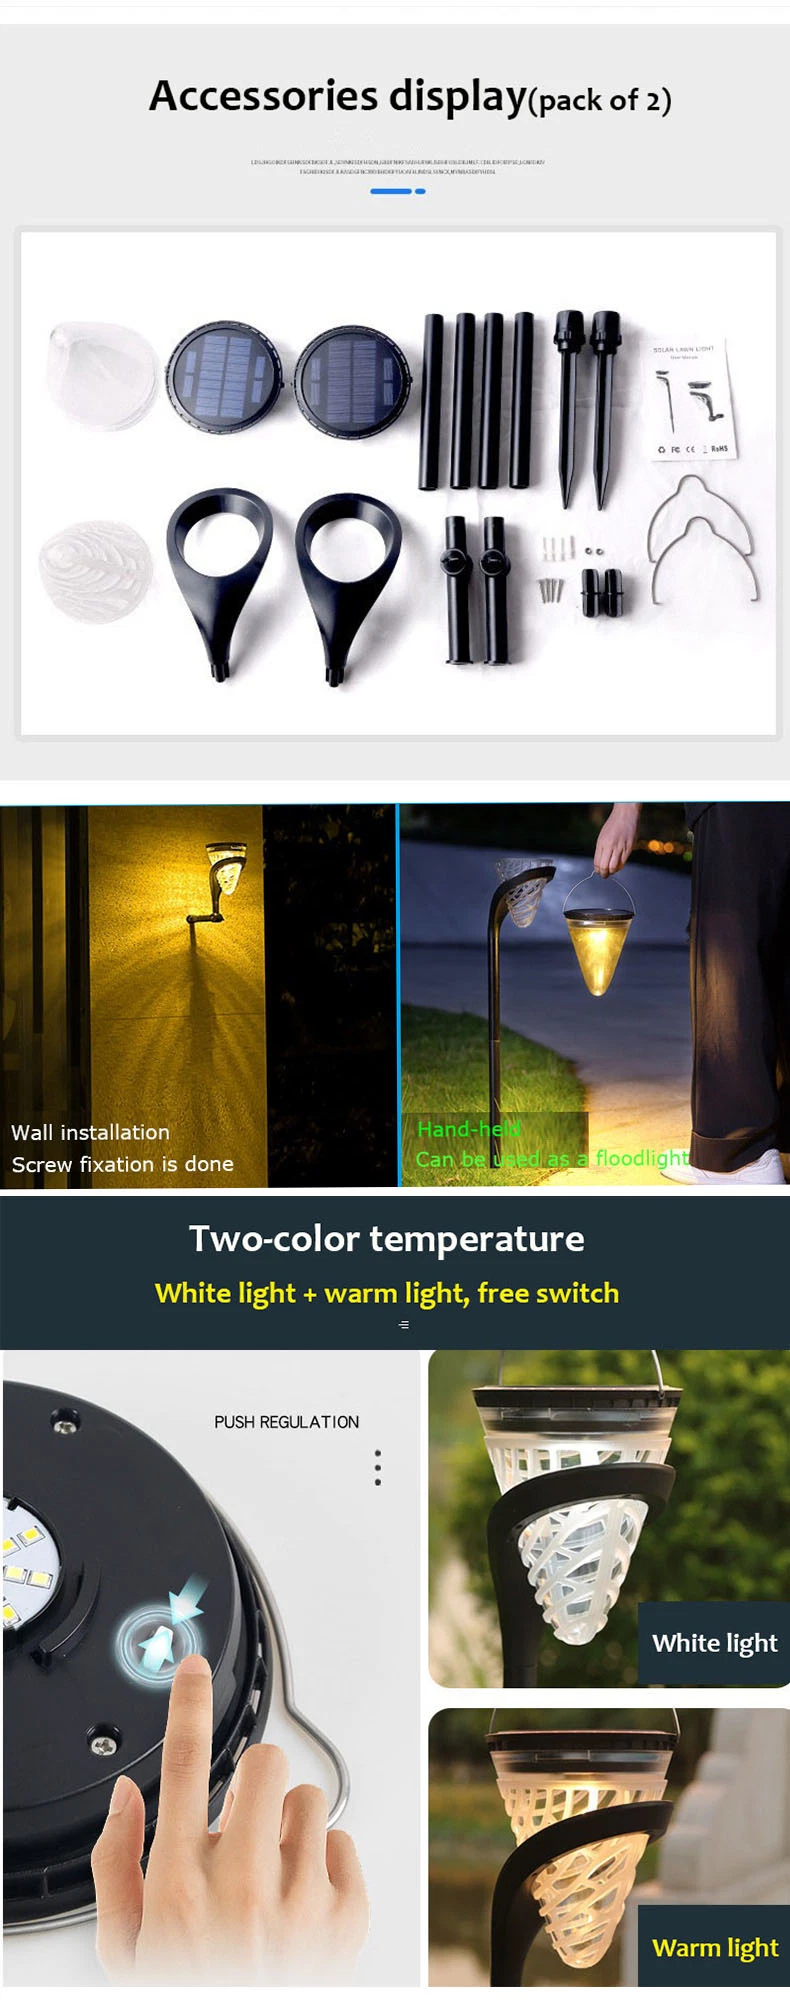 Solar Path Lights 2 Pack, Solar Powered Garden Lights Outdoor, Bright Solar Camping Lantern Waterproof for Landscape, Lawn, Pathway, Walkway and Driveway